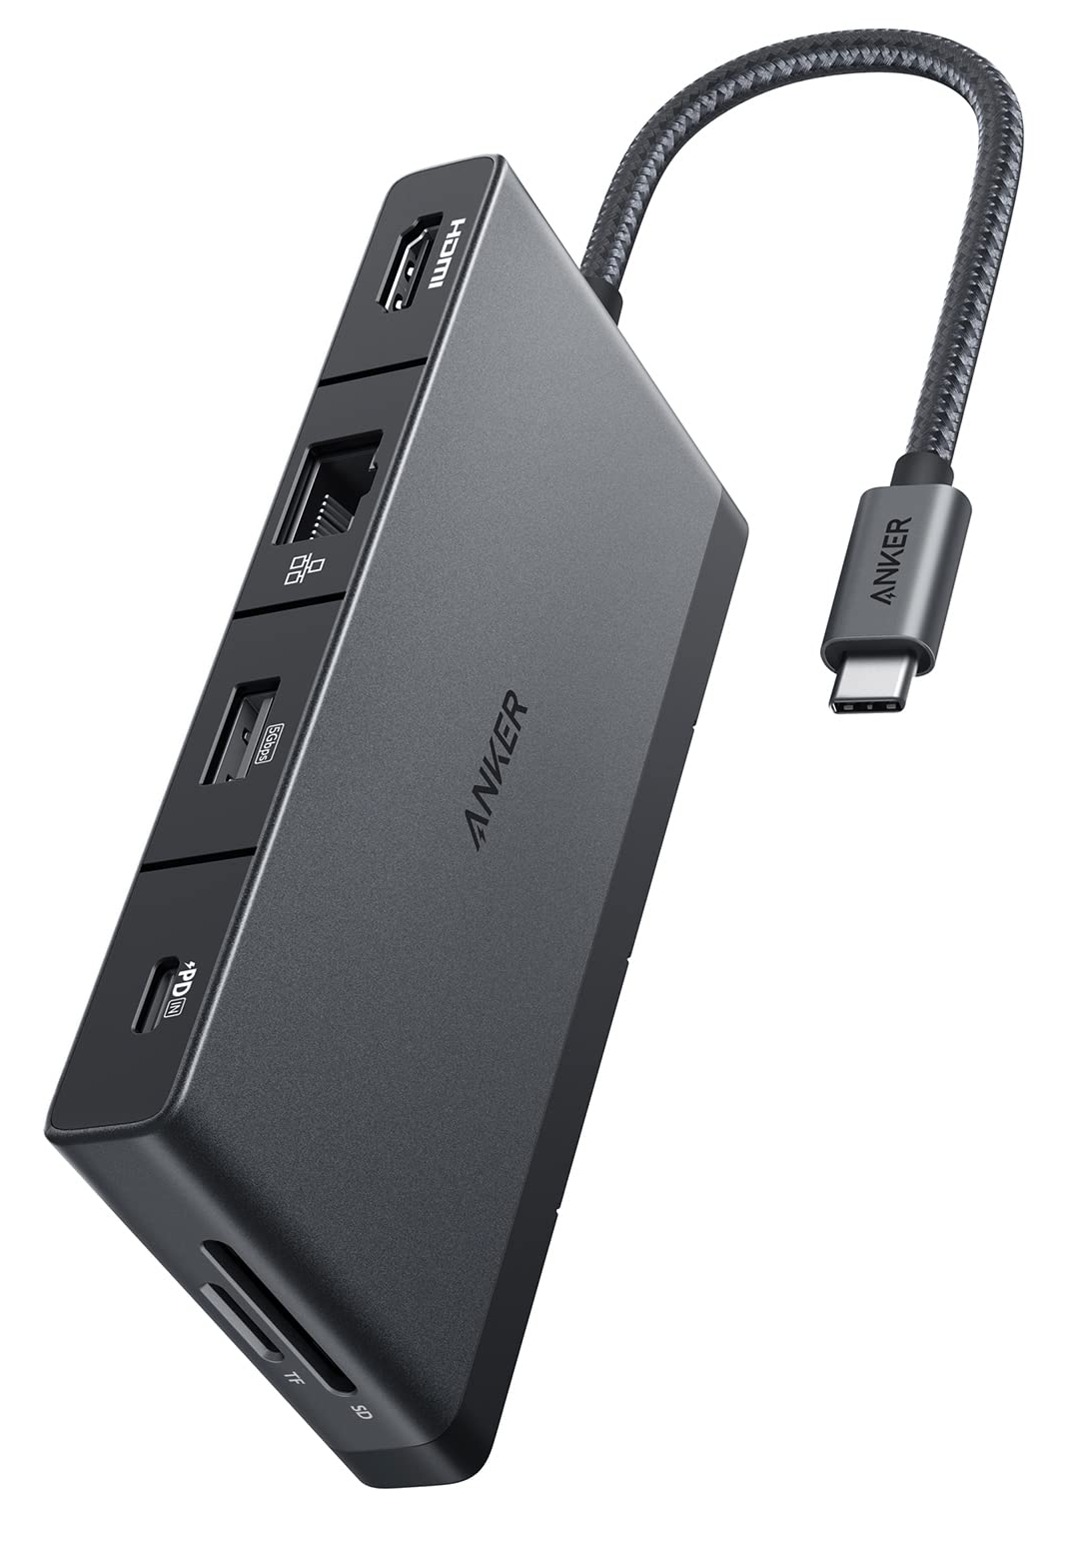 Anker 552 USB hub with 100W Power Delivery, [4K]@30Hz [HDMI], 4 [USB]-[C] and [USB]-A Data Ports, Ethernet and SD/microSD [C]ard Slot for MacBook, HP, Dell Laptops, and More $29.99